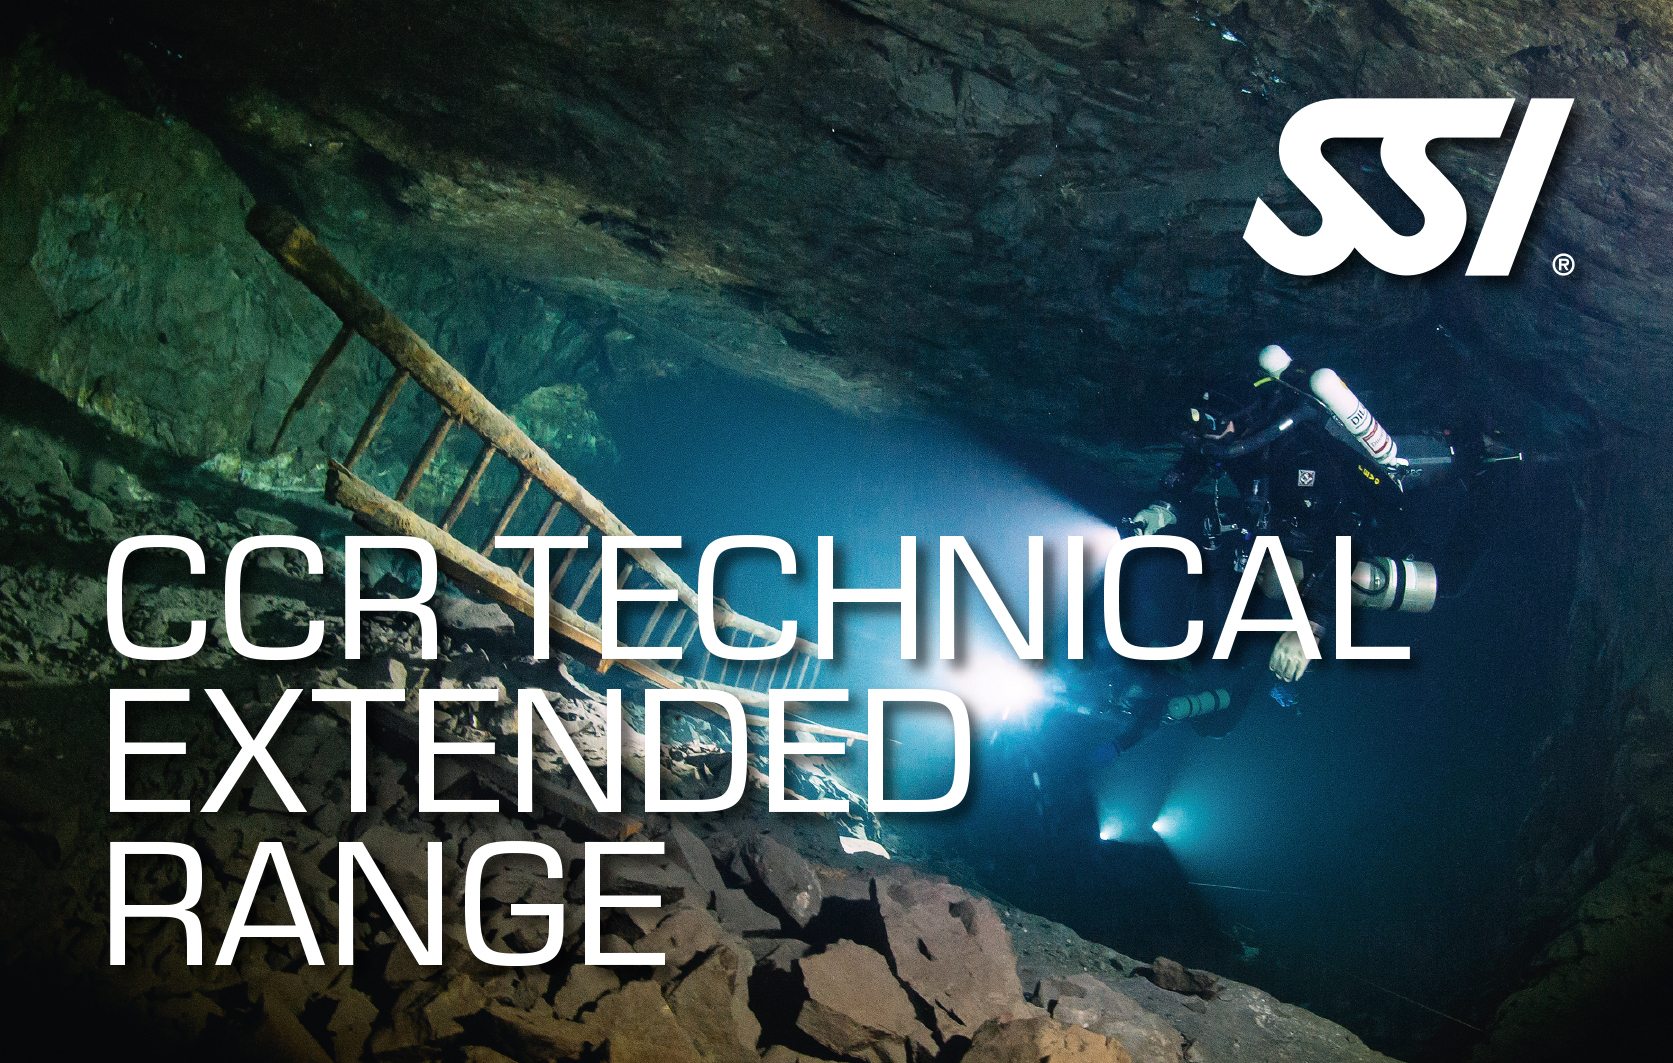 SSI CCR Tecnical Extended Range Course | SSI CCR Tecnical Extended Range | CCR Tecnical Extended Range | Diving Course